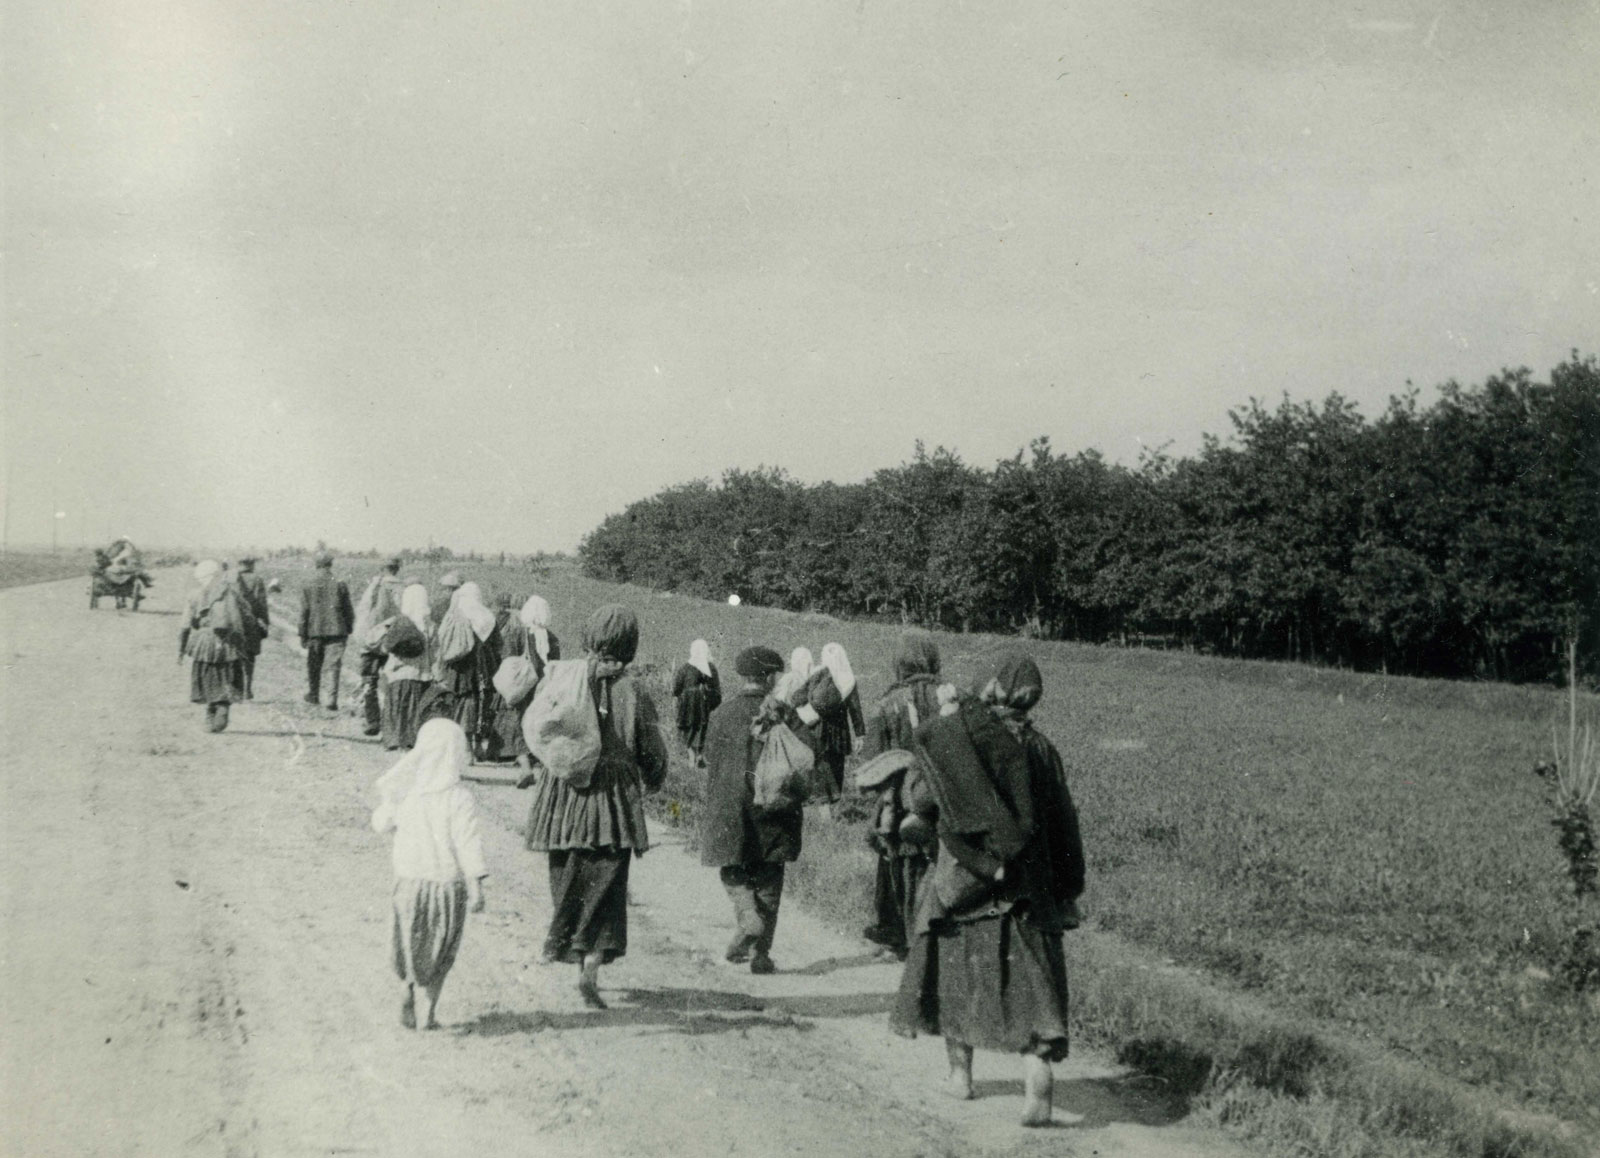 A black and white photograph of a dozen people walking on a dirt road along a field with trees.